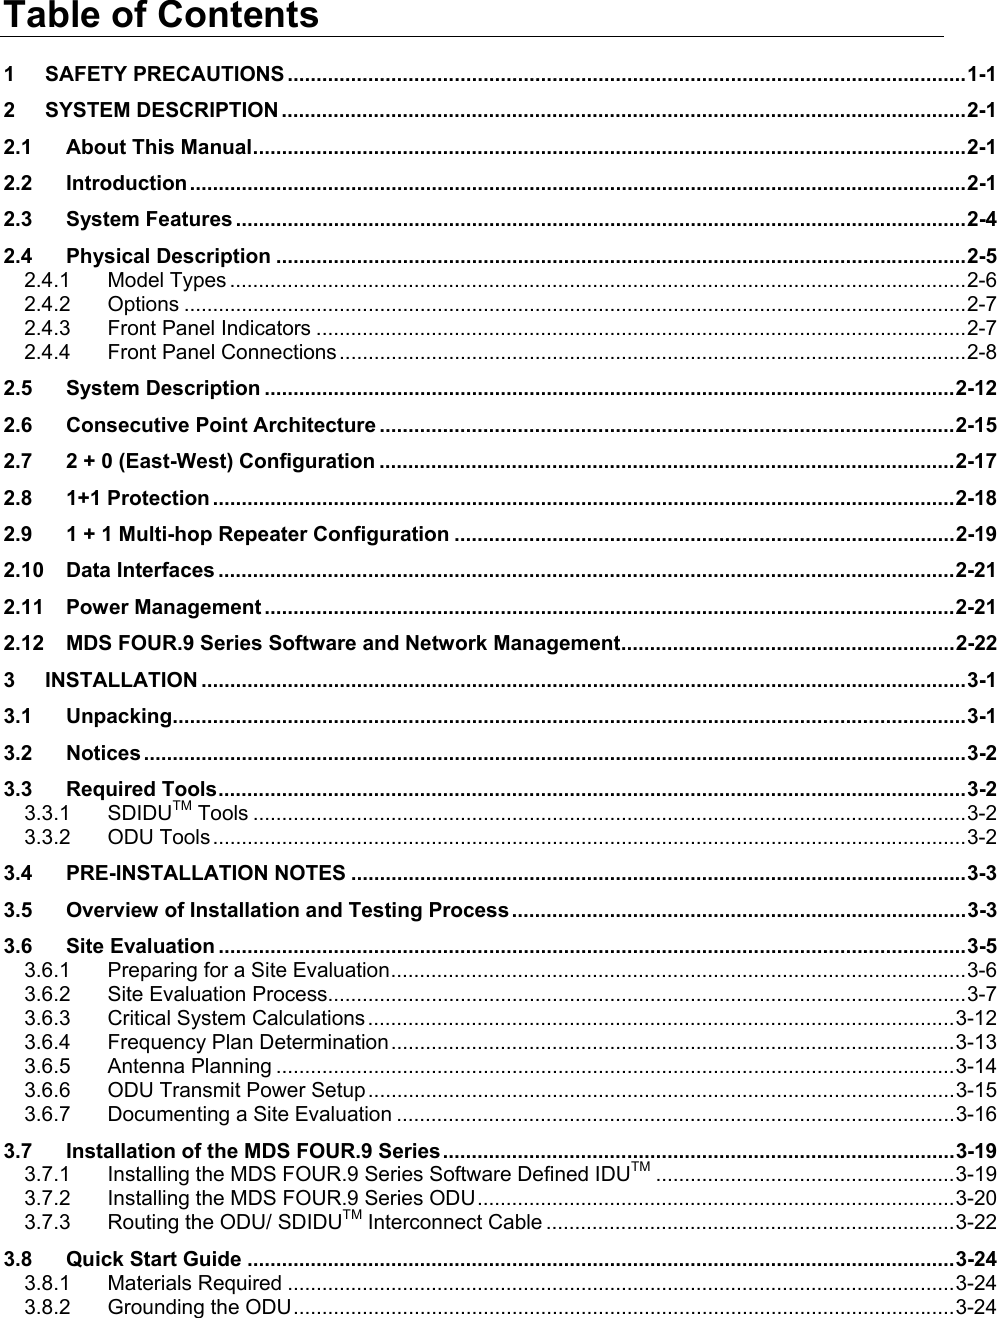 Table of Contents 1 SAFETY PRECAUTIONS ......................................................................................................................1-1 2 SYSTEM DESCRIPTION .......................................................................................................................2-1 2.1 About This Manual............................................................................................................................2-1 2.2 Introduction.......................................................................................................................................2-1 2.3 System Features ...............................................................................................................................2-4 2.4 Physical Description ........................................................................................................................2-5 2.4.1 Model Types ................................................................................................................................2-6 2.4.2 Options ........................................................................................................................................2-7 2.4.3 Front Panel Indicators .................................................................................................................2-7 2.4.4 Front Panel Connections .............................................................................................................2-8 2.5 System Description ........................................................................................................................2-12 2.6 Consecutive Point Architecture ....................................................................................................2-15 2.7 2 + 0 (East-West) Configuration ....................................................................................................2-17 2.8 1+1 Protection .................................................................................................................................2-18 2.9 1 + 1 Multi-hop Repeater Configuration .......................................................................................2-19 2.10 Data Interfaces ................................................................................................................................2-21 2.11 Power Management ........................................................................................................................2-21 2.12 MDS FOUR.9 Series Software and Network Management..........................................................2-22 3 INSTALLATION .....................................................................................................................................3-1 3.1 Unpacking..........................................................................................................................................3-1 3.2 Notices ...............................................................................................................................................3-2 3.3 Required Tools..................................................................................................................................3-2 3.3.1 SDIDUTM Tools ............................................................................................................................3-2 3.3.2 ODU Tools...................................................................................................................................3-2 3.4 PRE-INSTALLATION NOTES ...........................................................................................................3-3 3.5 Overview of Installation and Testing Process...............................................................................3-3 3.6 Site Evaluation ..................................................................................................................................3-5 3.6.1 Preparing for a Site Evaluation....................................................................................................3-6 3.6.2 Site Evaluation Process...............................................................................................................3-7 3.6.3 Critical System Calculations ......................................................................................................3-12 3.6.4 Frequency Plan Determination..................................................................................................3-13 3.6.5 Antenna Planning ......................................................................................................................3-14 3.6.6 ODU Transmit Power Setup......................................................................................................3-15 3.6.7 Documenting a Site Evaluation .................................................................................................3-16 3.7 Installation of the MDS FOUR.9 Series.........................................................................................3-19 3.7.1 Installing the MDS FOUR.9 Series Software Defined IDUTM ....................................................3-19 3.7.2 Installing the MDS FOUR.9 Series ODU...................................................................................3-20 3.7.3 Routing the ODU/ SDIDUTM Interconnect Cable .......................................................................3-22 3.8 Quick Start Guide ...........................................................................................................................3-24 3.8.1 Materials Required ....................................................................................................................3-24 3.8.2 Grounding the ODU...................................................................................................................3-24 